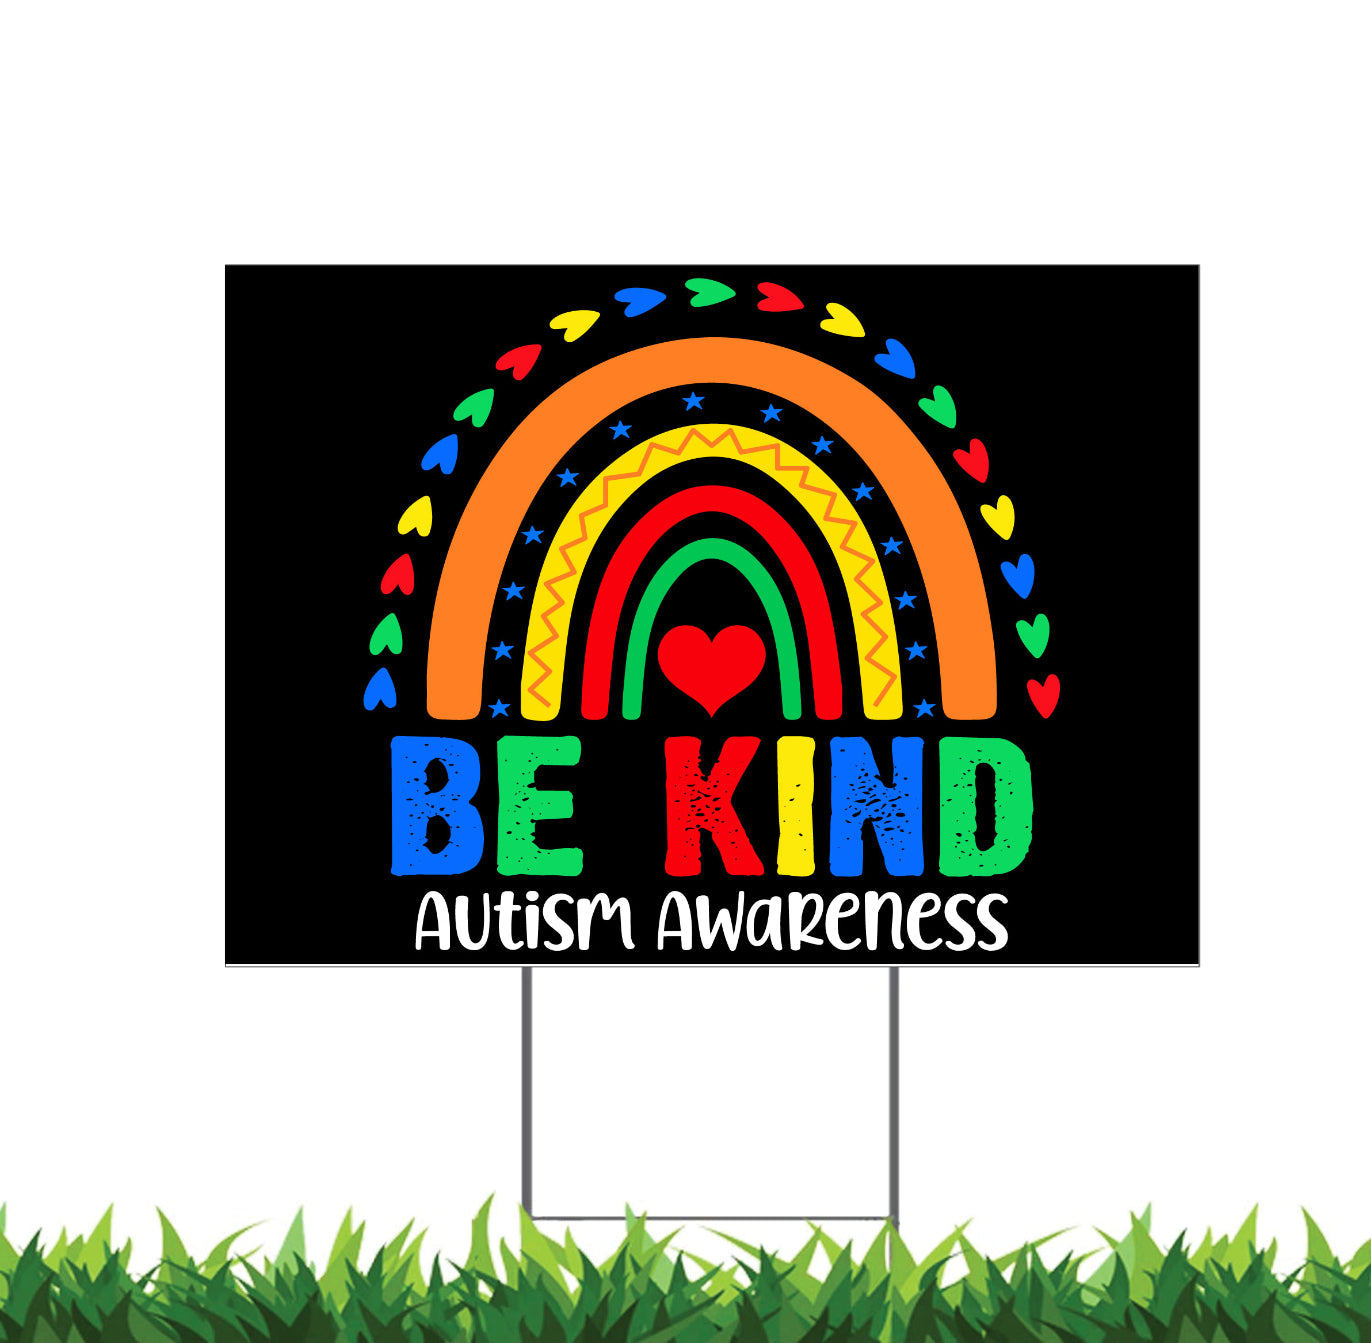 Autism Awareness Yard Sign, 18x12, 24x18, 36x24, Double Sided, H-Stake Included, v5